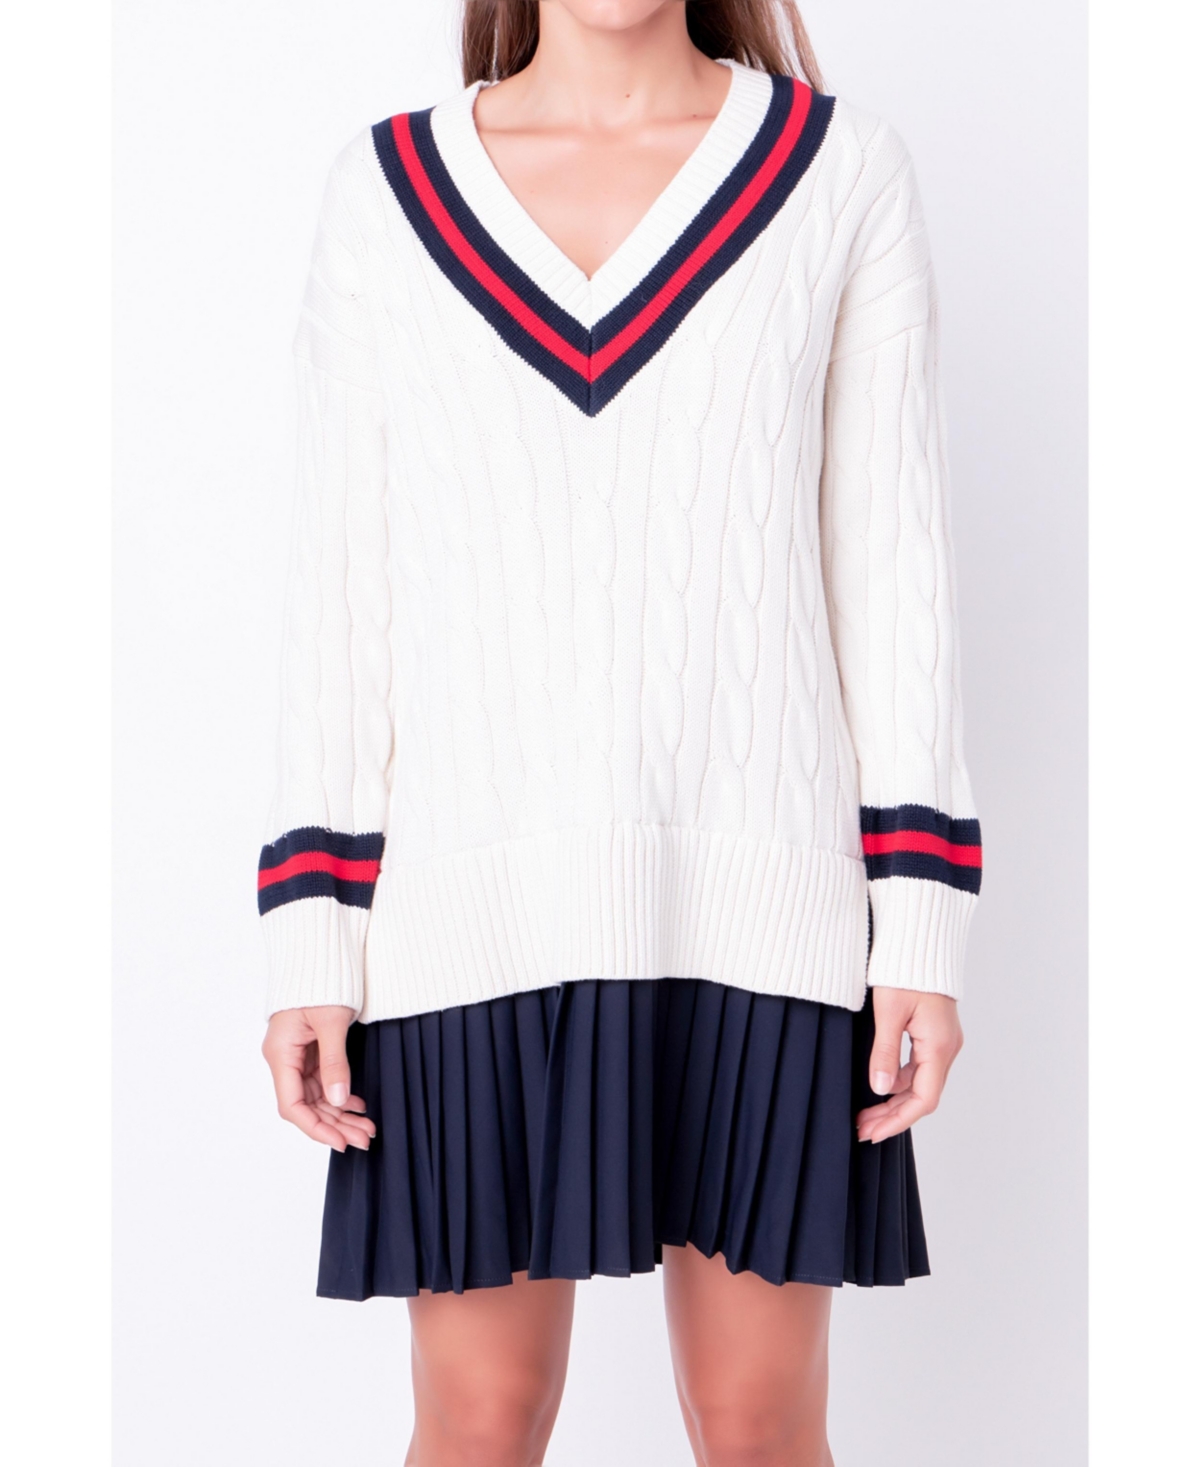 Buy Boardwalk Empire Inspired Dresses Womens Cable Knit Pleated Sweater Dress - Ivory multi $130.00 AT vintagedancer.com